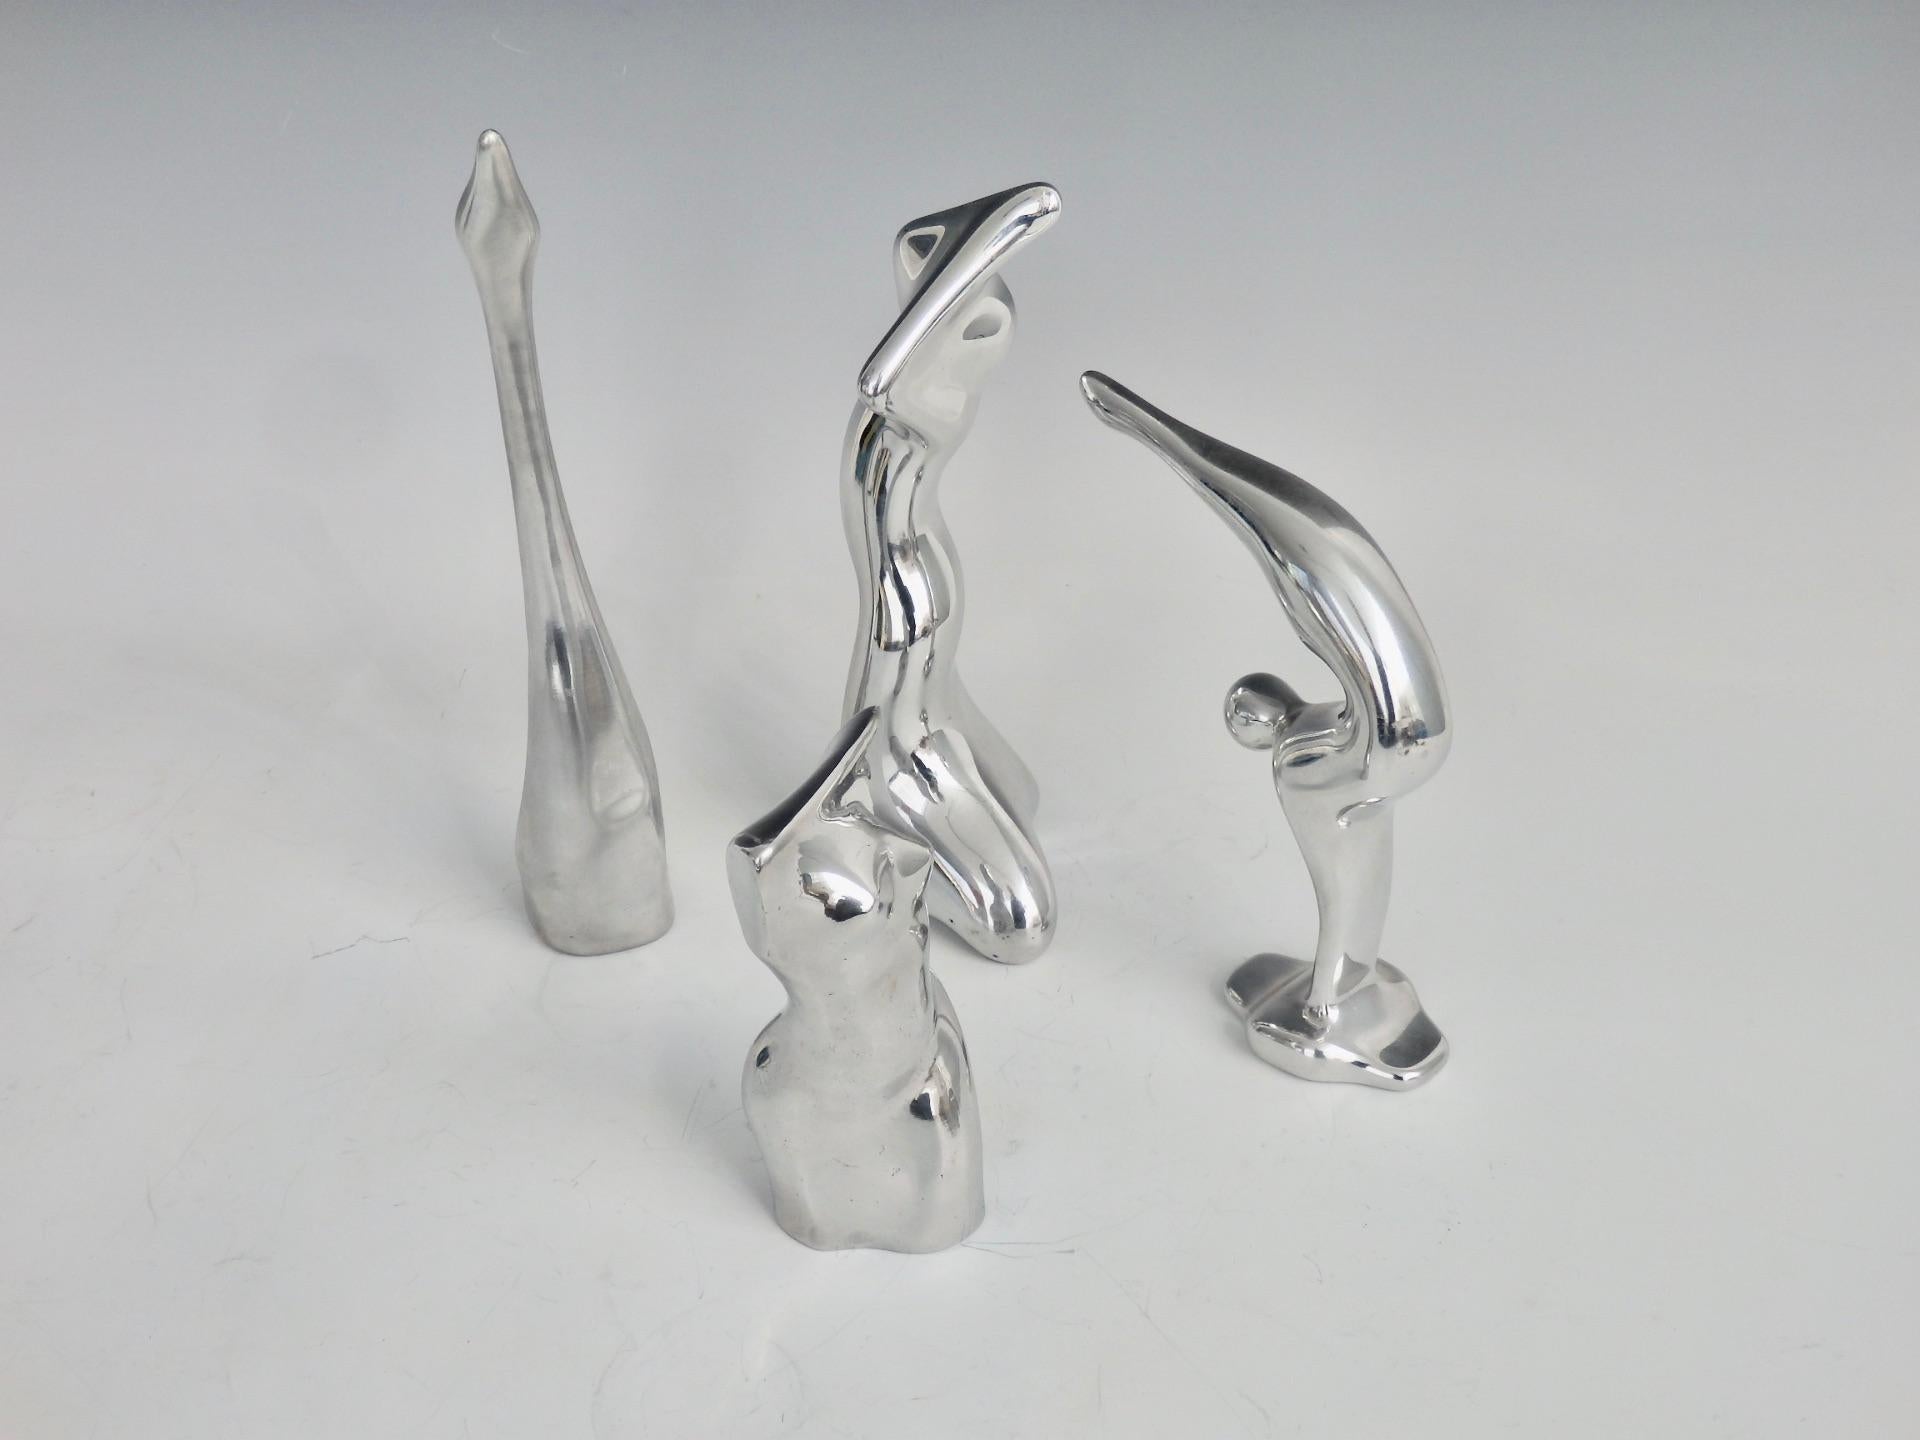 20th Century Four Piece Collection of Polished Aluminum Stylized Figures by Hoselton